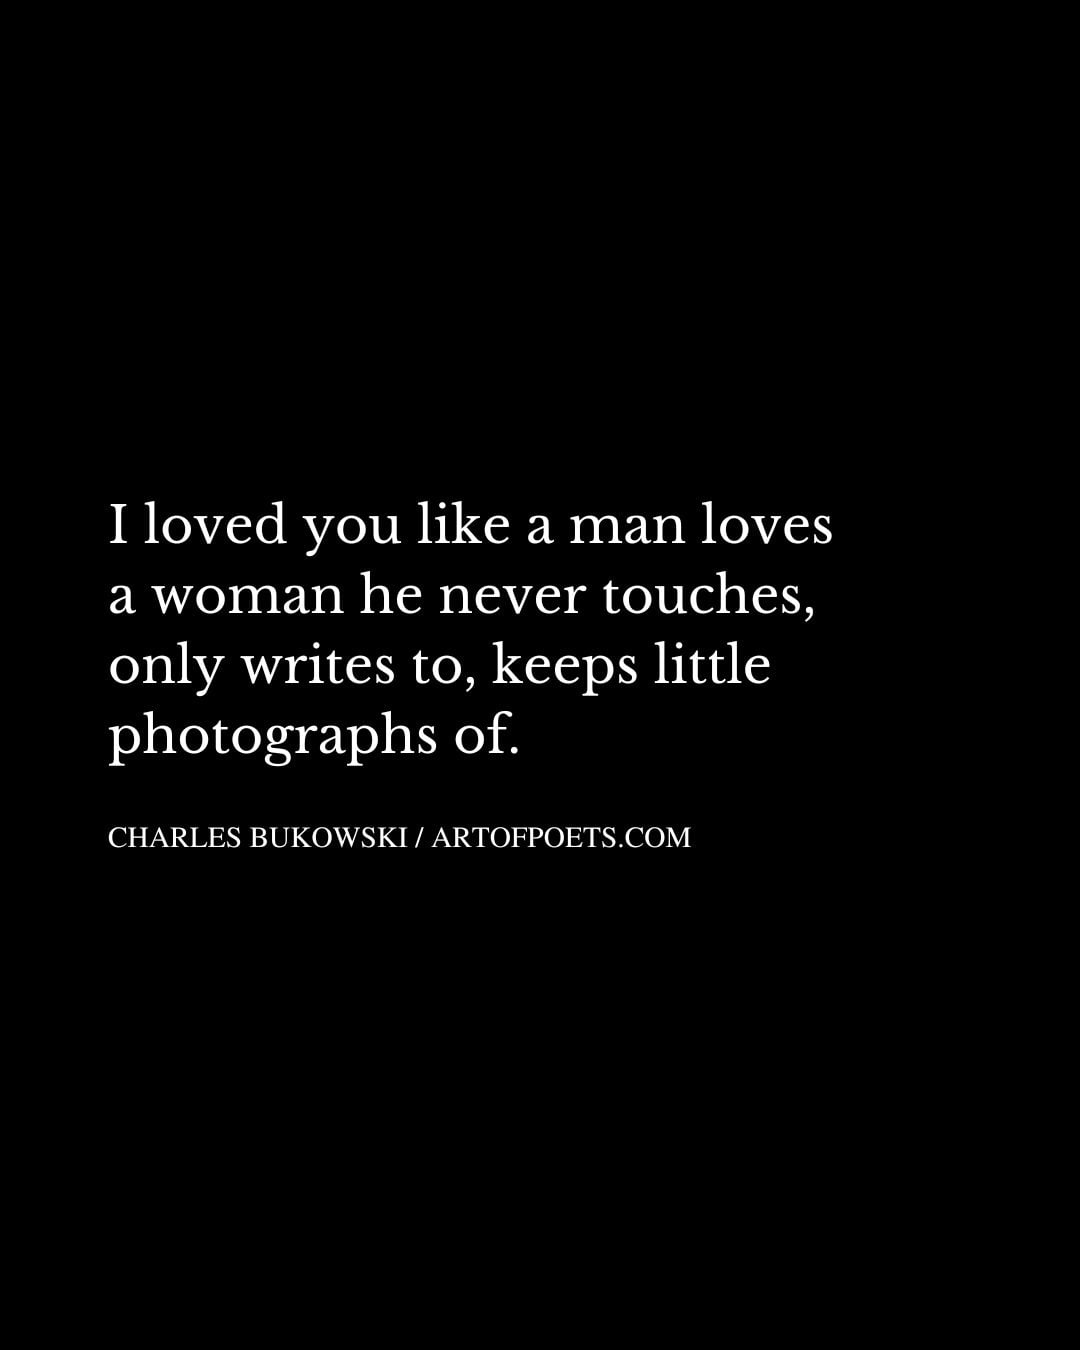 I loved you like a man loves a woman he never touches only writes to keeps little photographs of